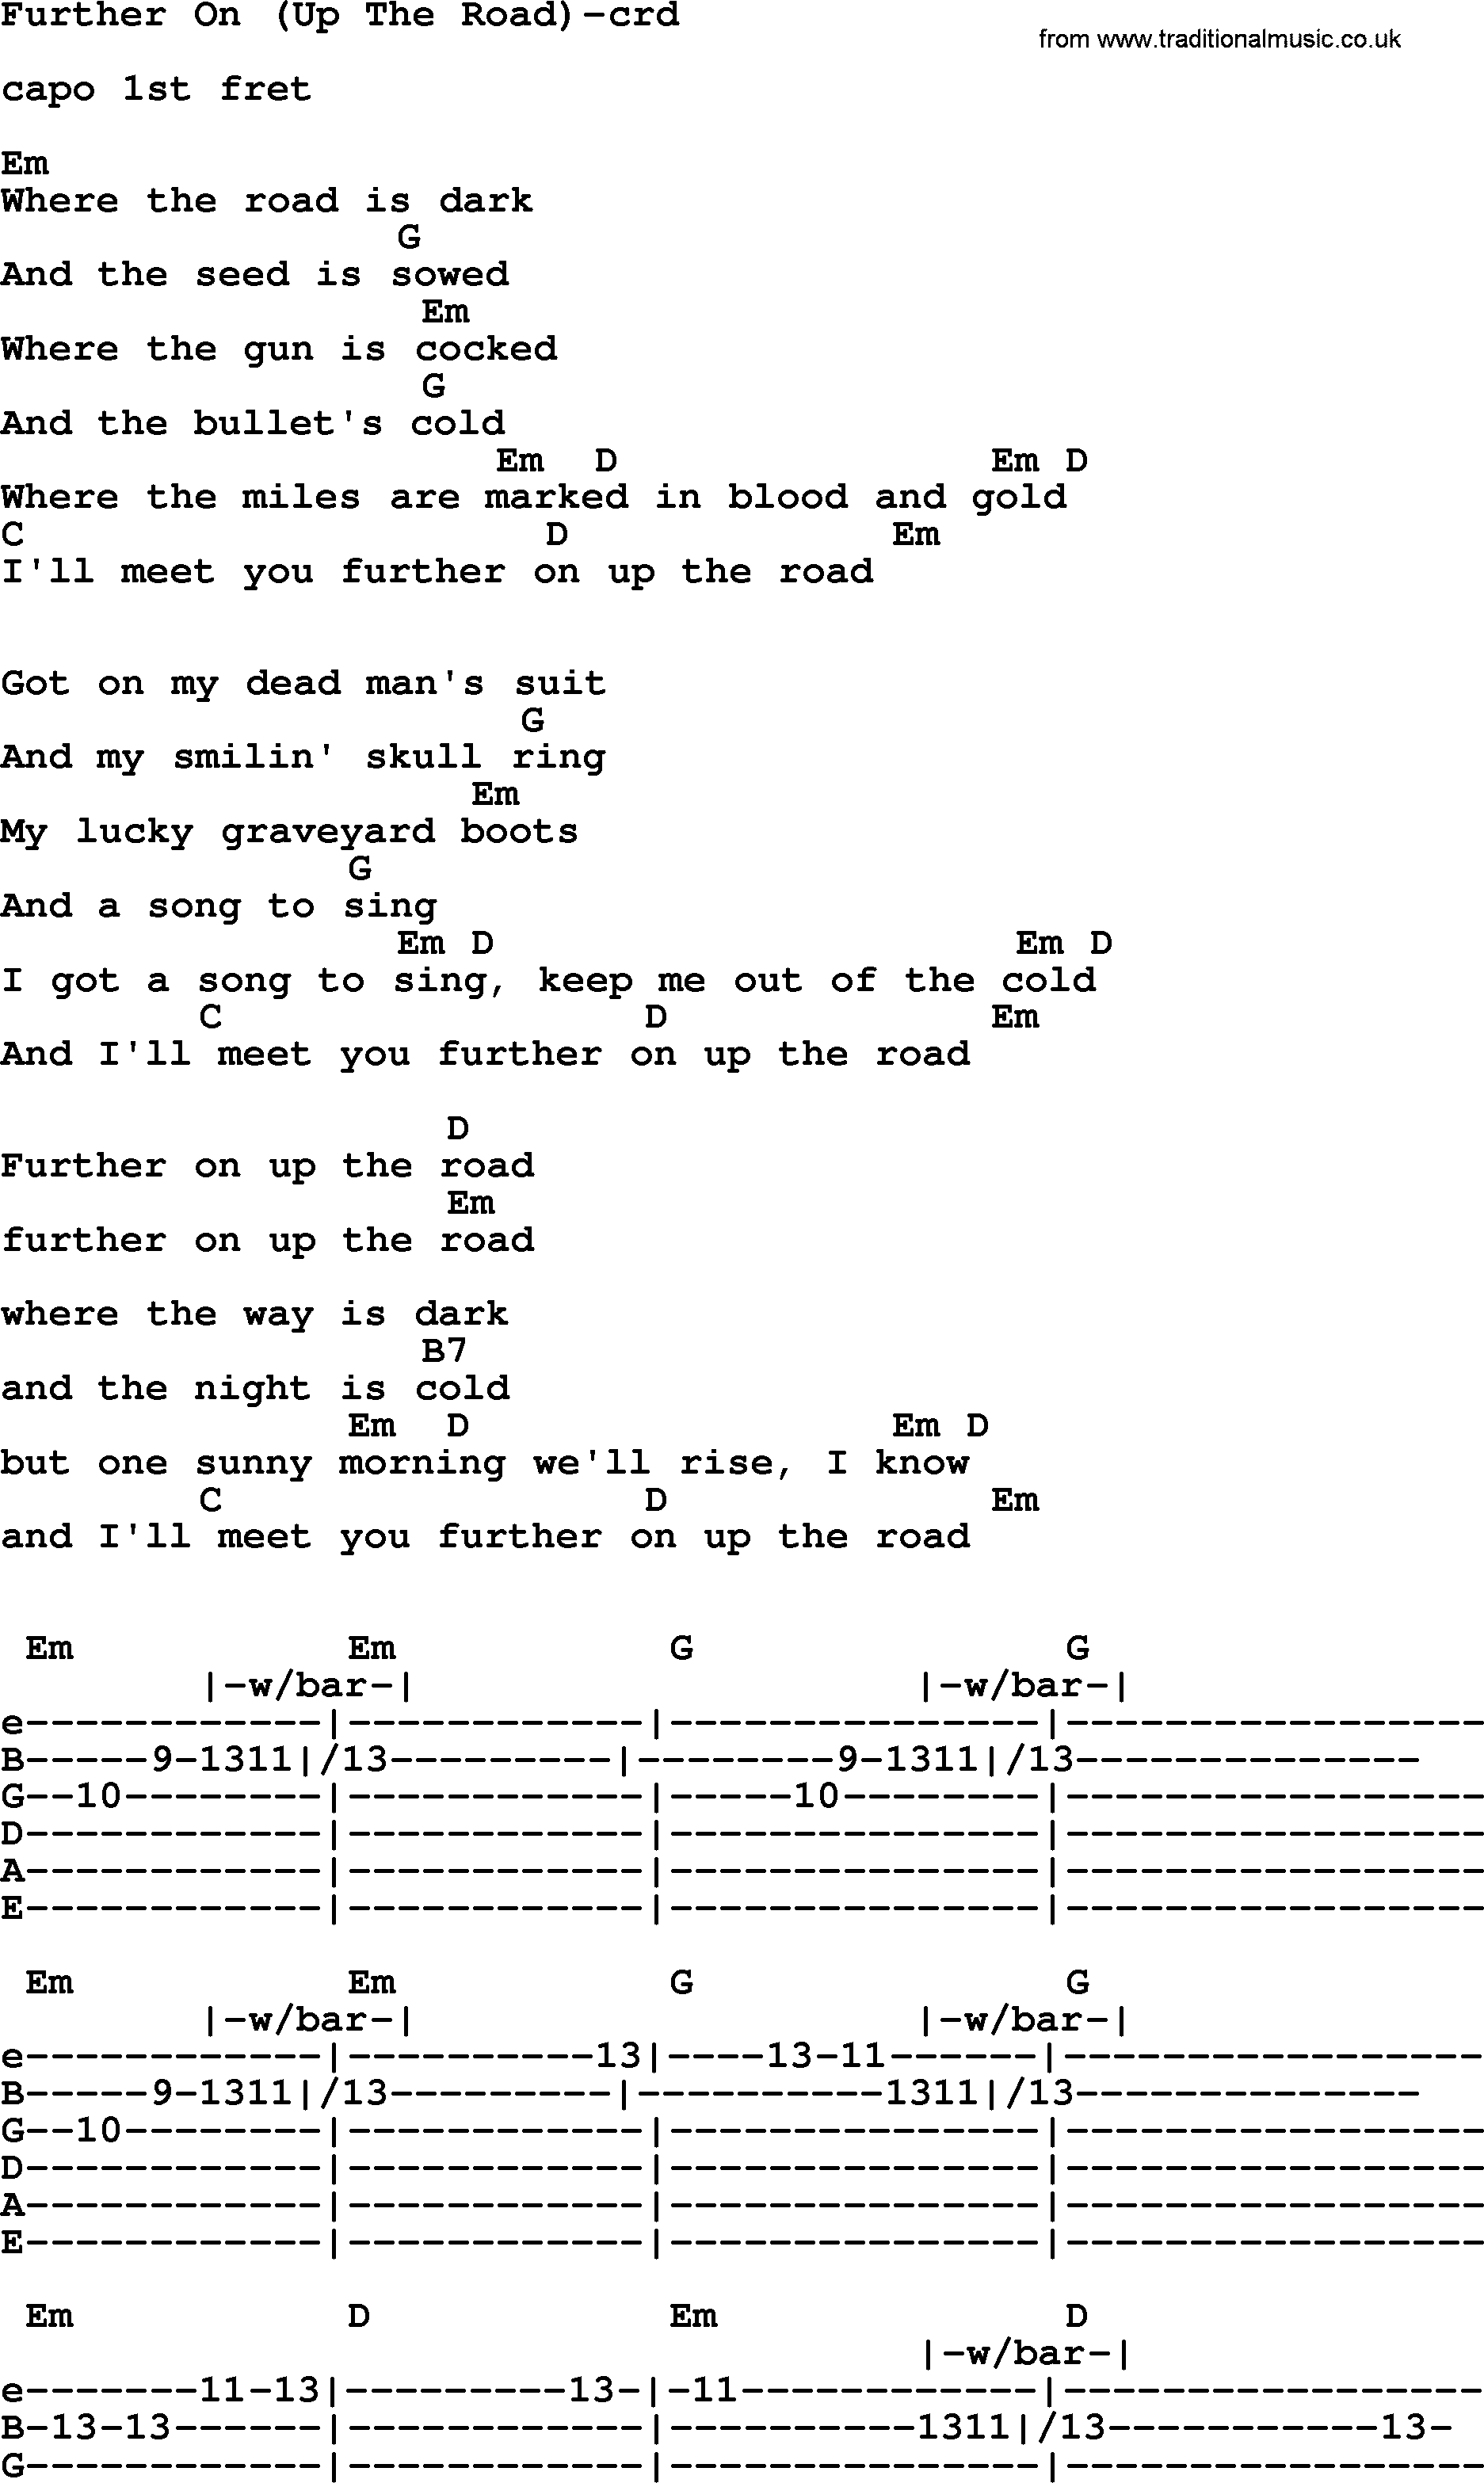 Bruce Springsteen song: Further On(Up The Road), lyrics and chords